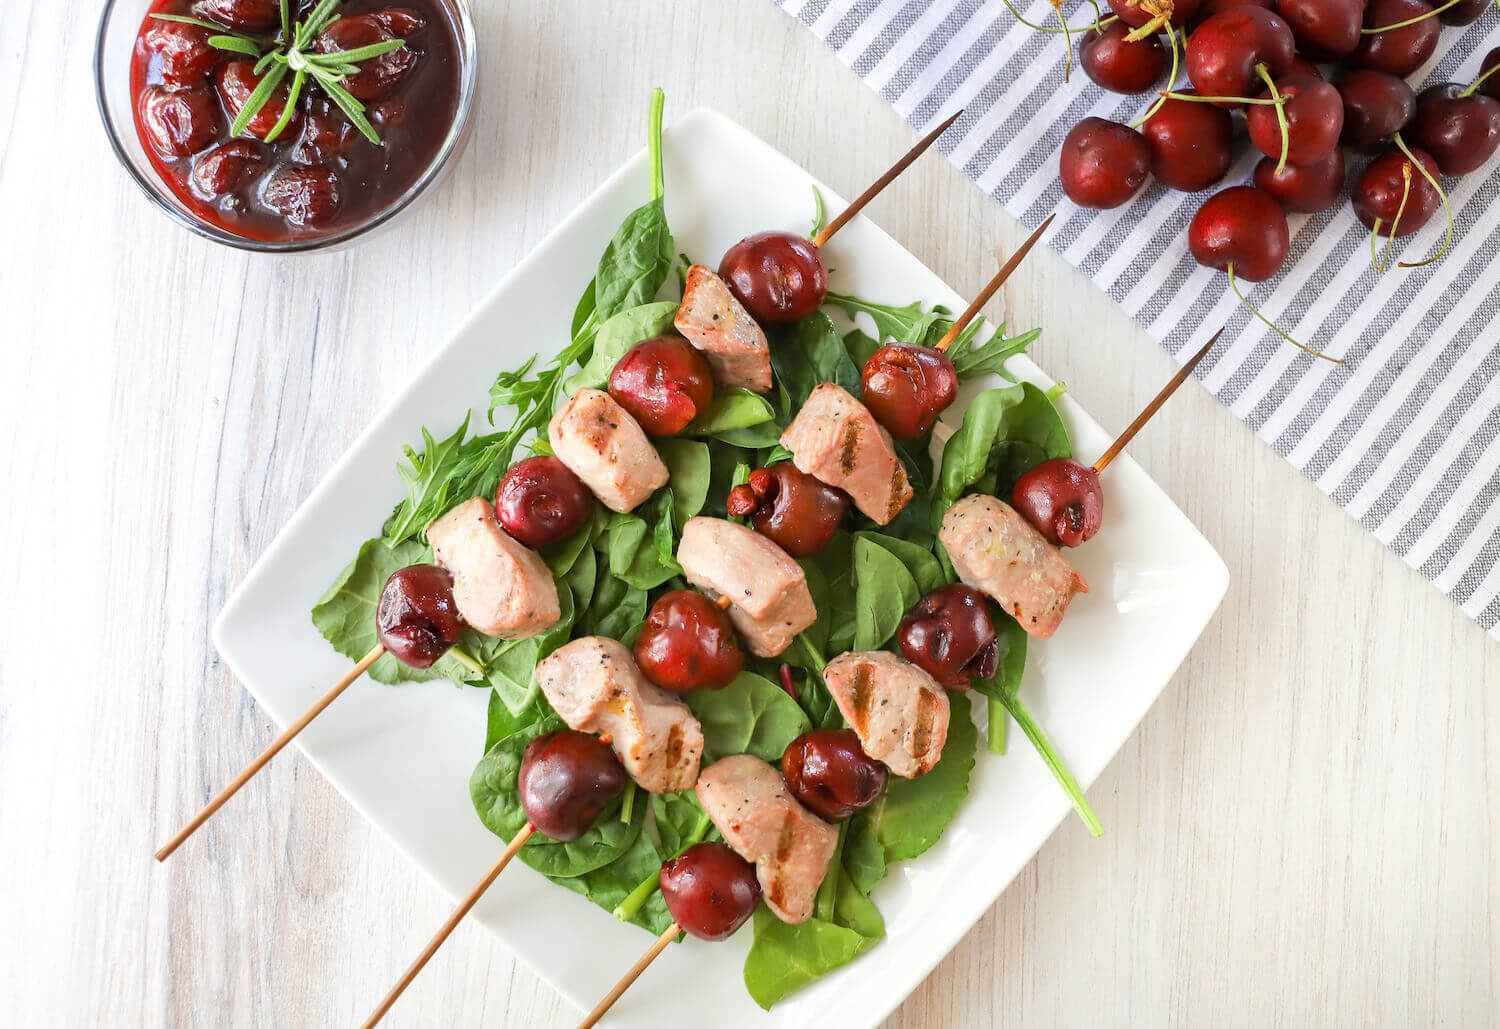 Cherry and Pork Skewers with Cherry Rosemary Sauce